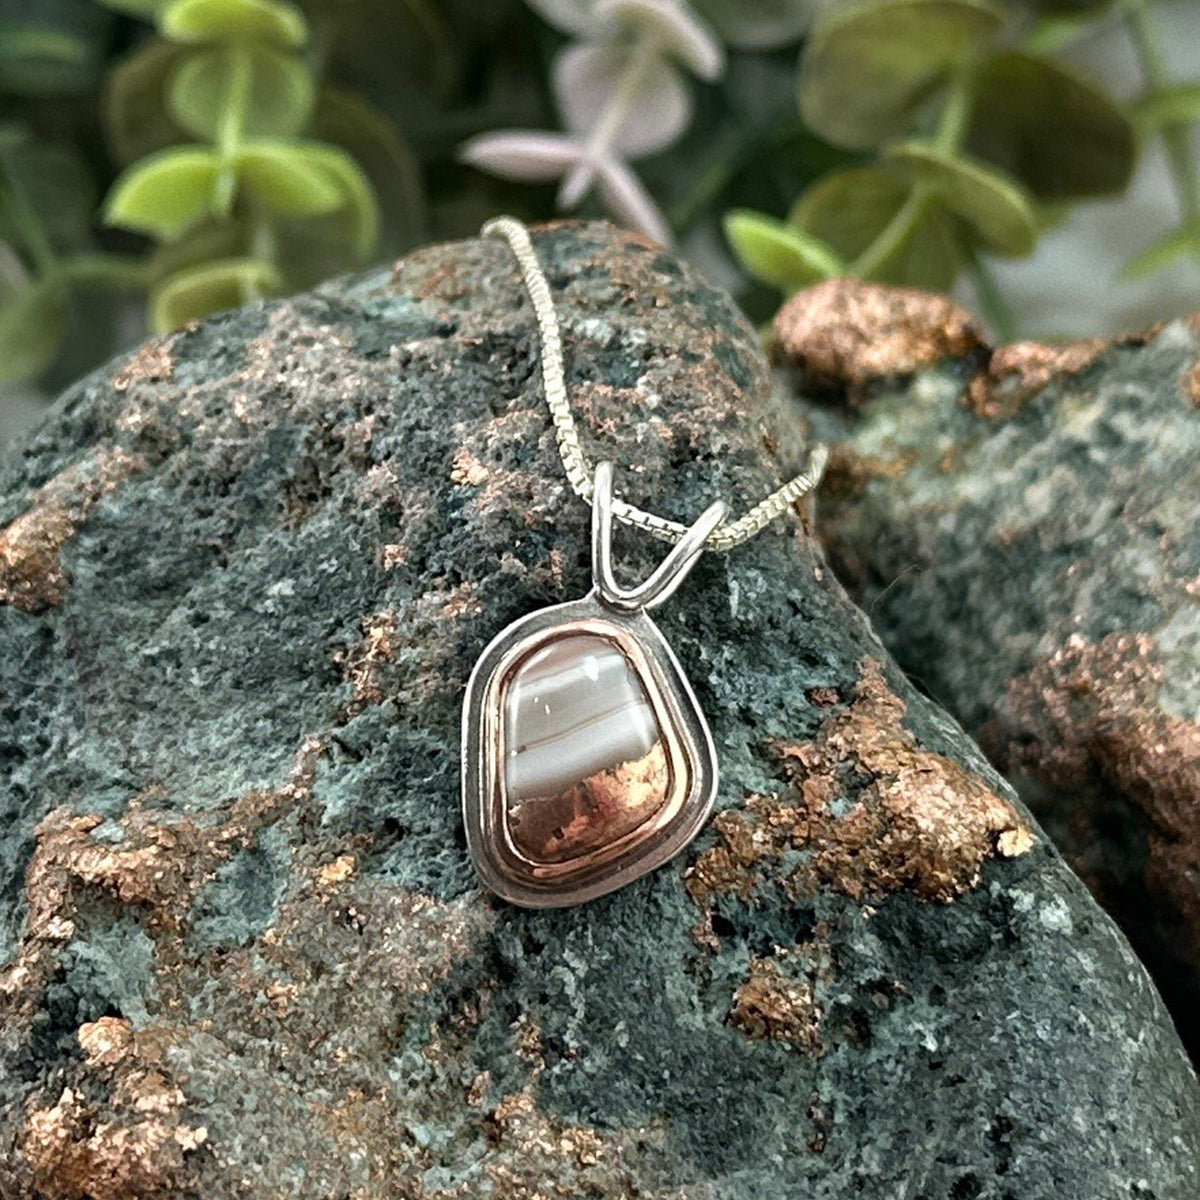 Copper Set Lake Superior Copper Agate Drop Pendant No. 1 - Mixed Metal Pendant   7180 - handmade by Beth Millner Jewelry